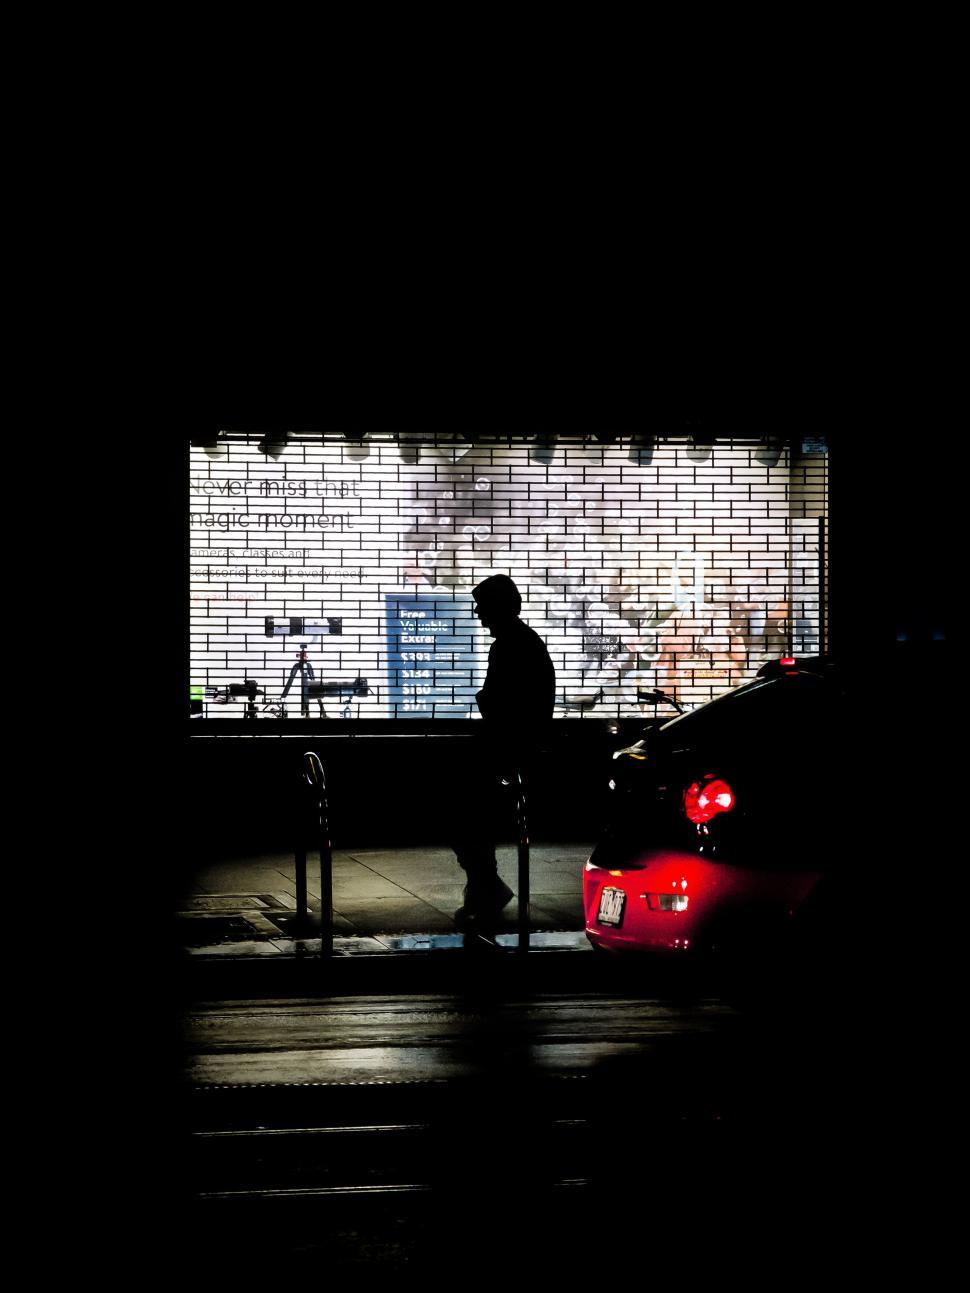 Free Image of Silhouetted figure in car-lit night setting 